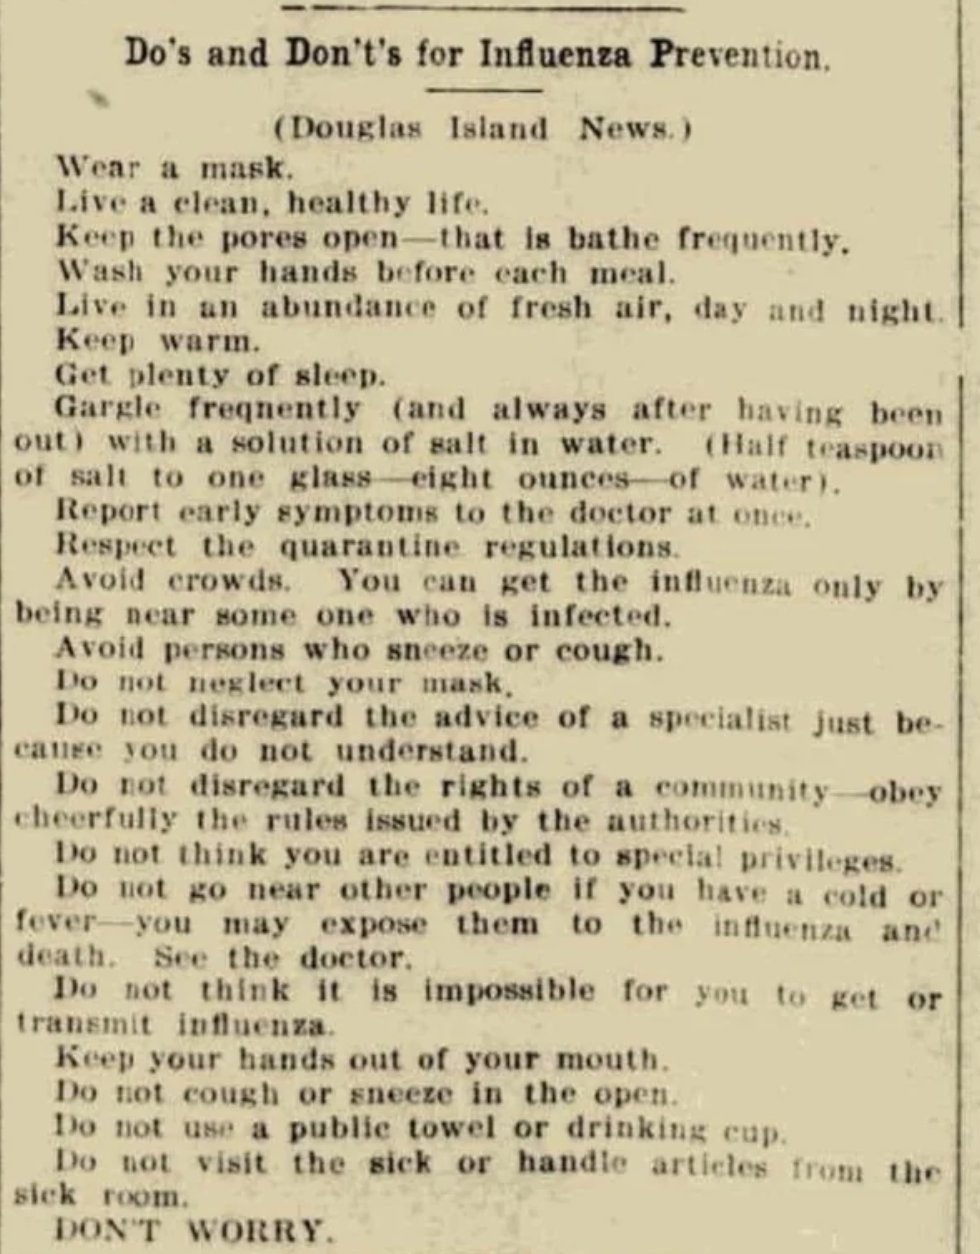 A vintage influenza prevention flyer with advice like wear masks, wash your hands before meals, keep your hands out of your mouth, observe quarantine regulations and avoid crowds, and get plenty of fresh air and sleep